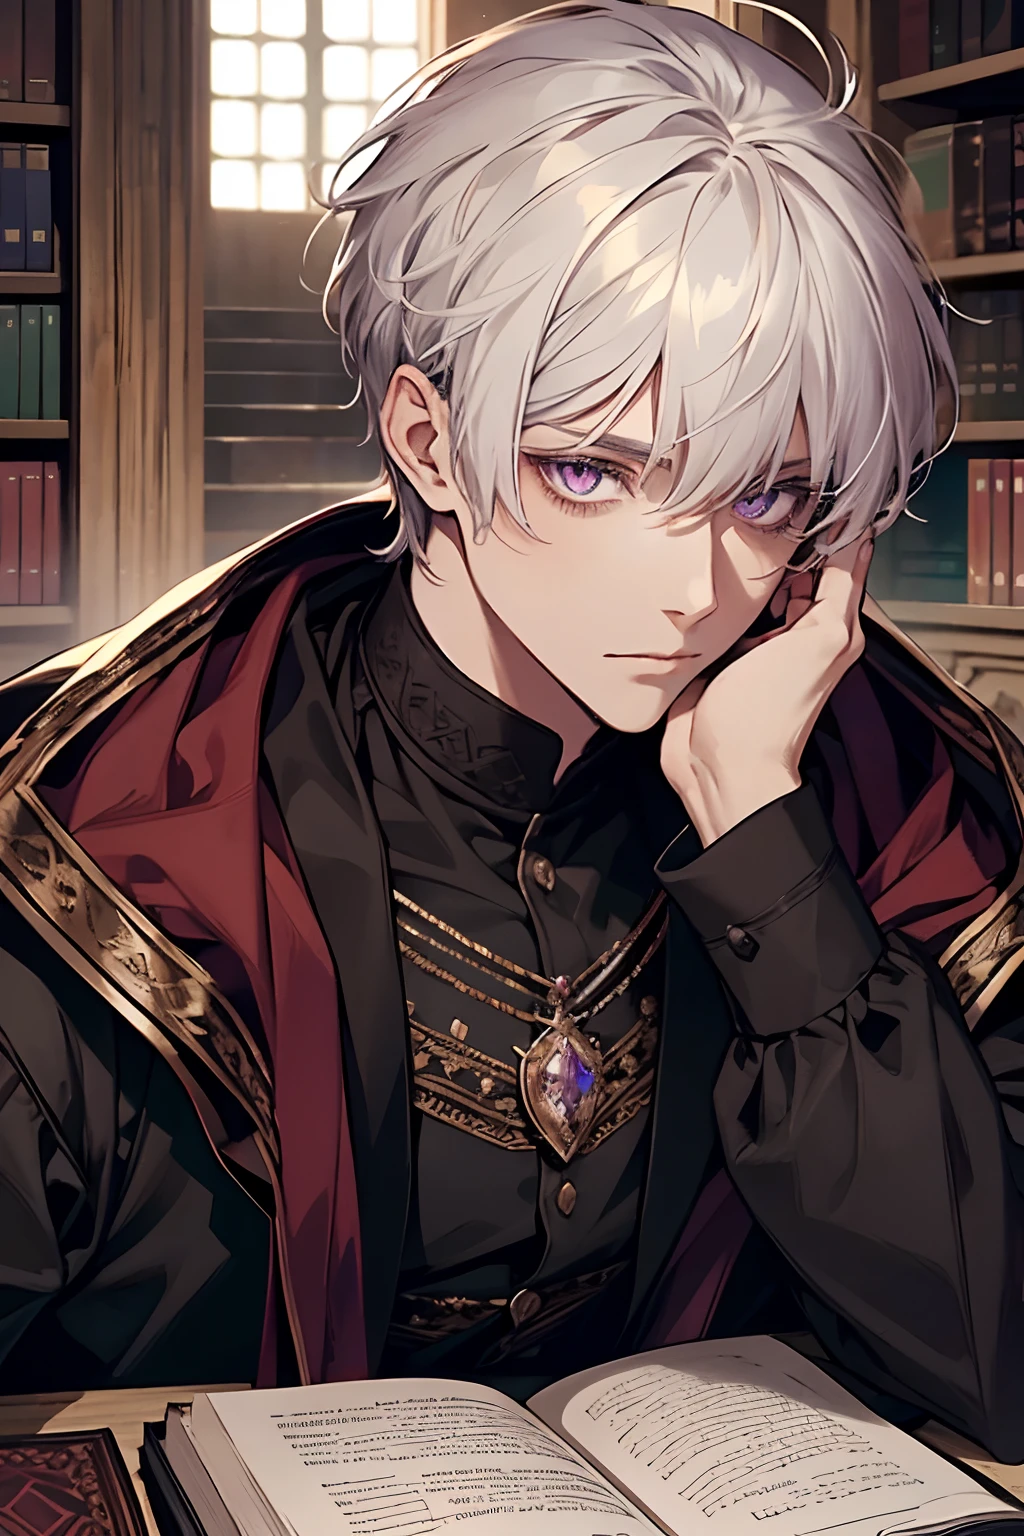 1male, calm, adult, mature face, short messy with bangs, white hair, amethyst colored eyes, royalty, prince, wears black clothing, in a castle, adult face, medieval times, close up, books on a table